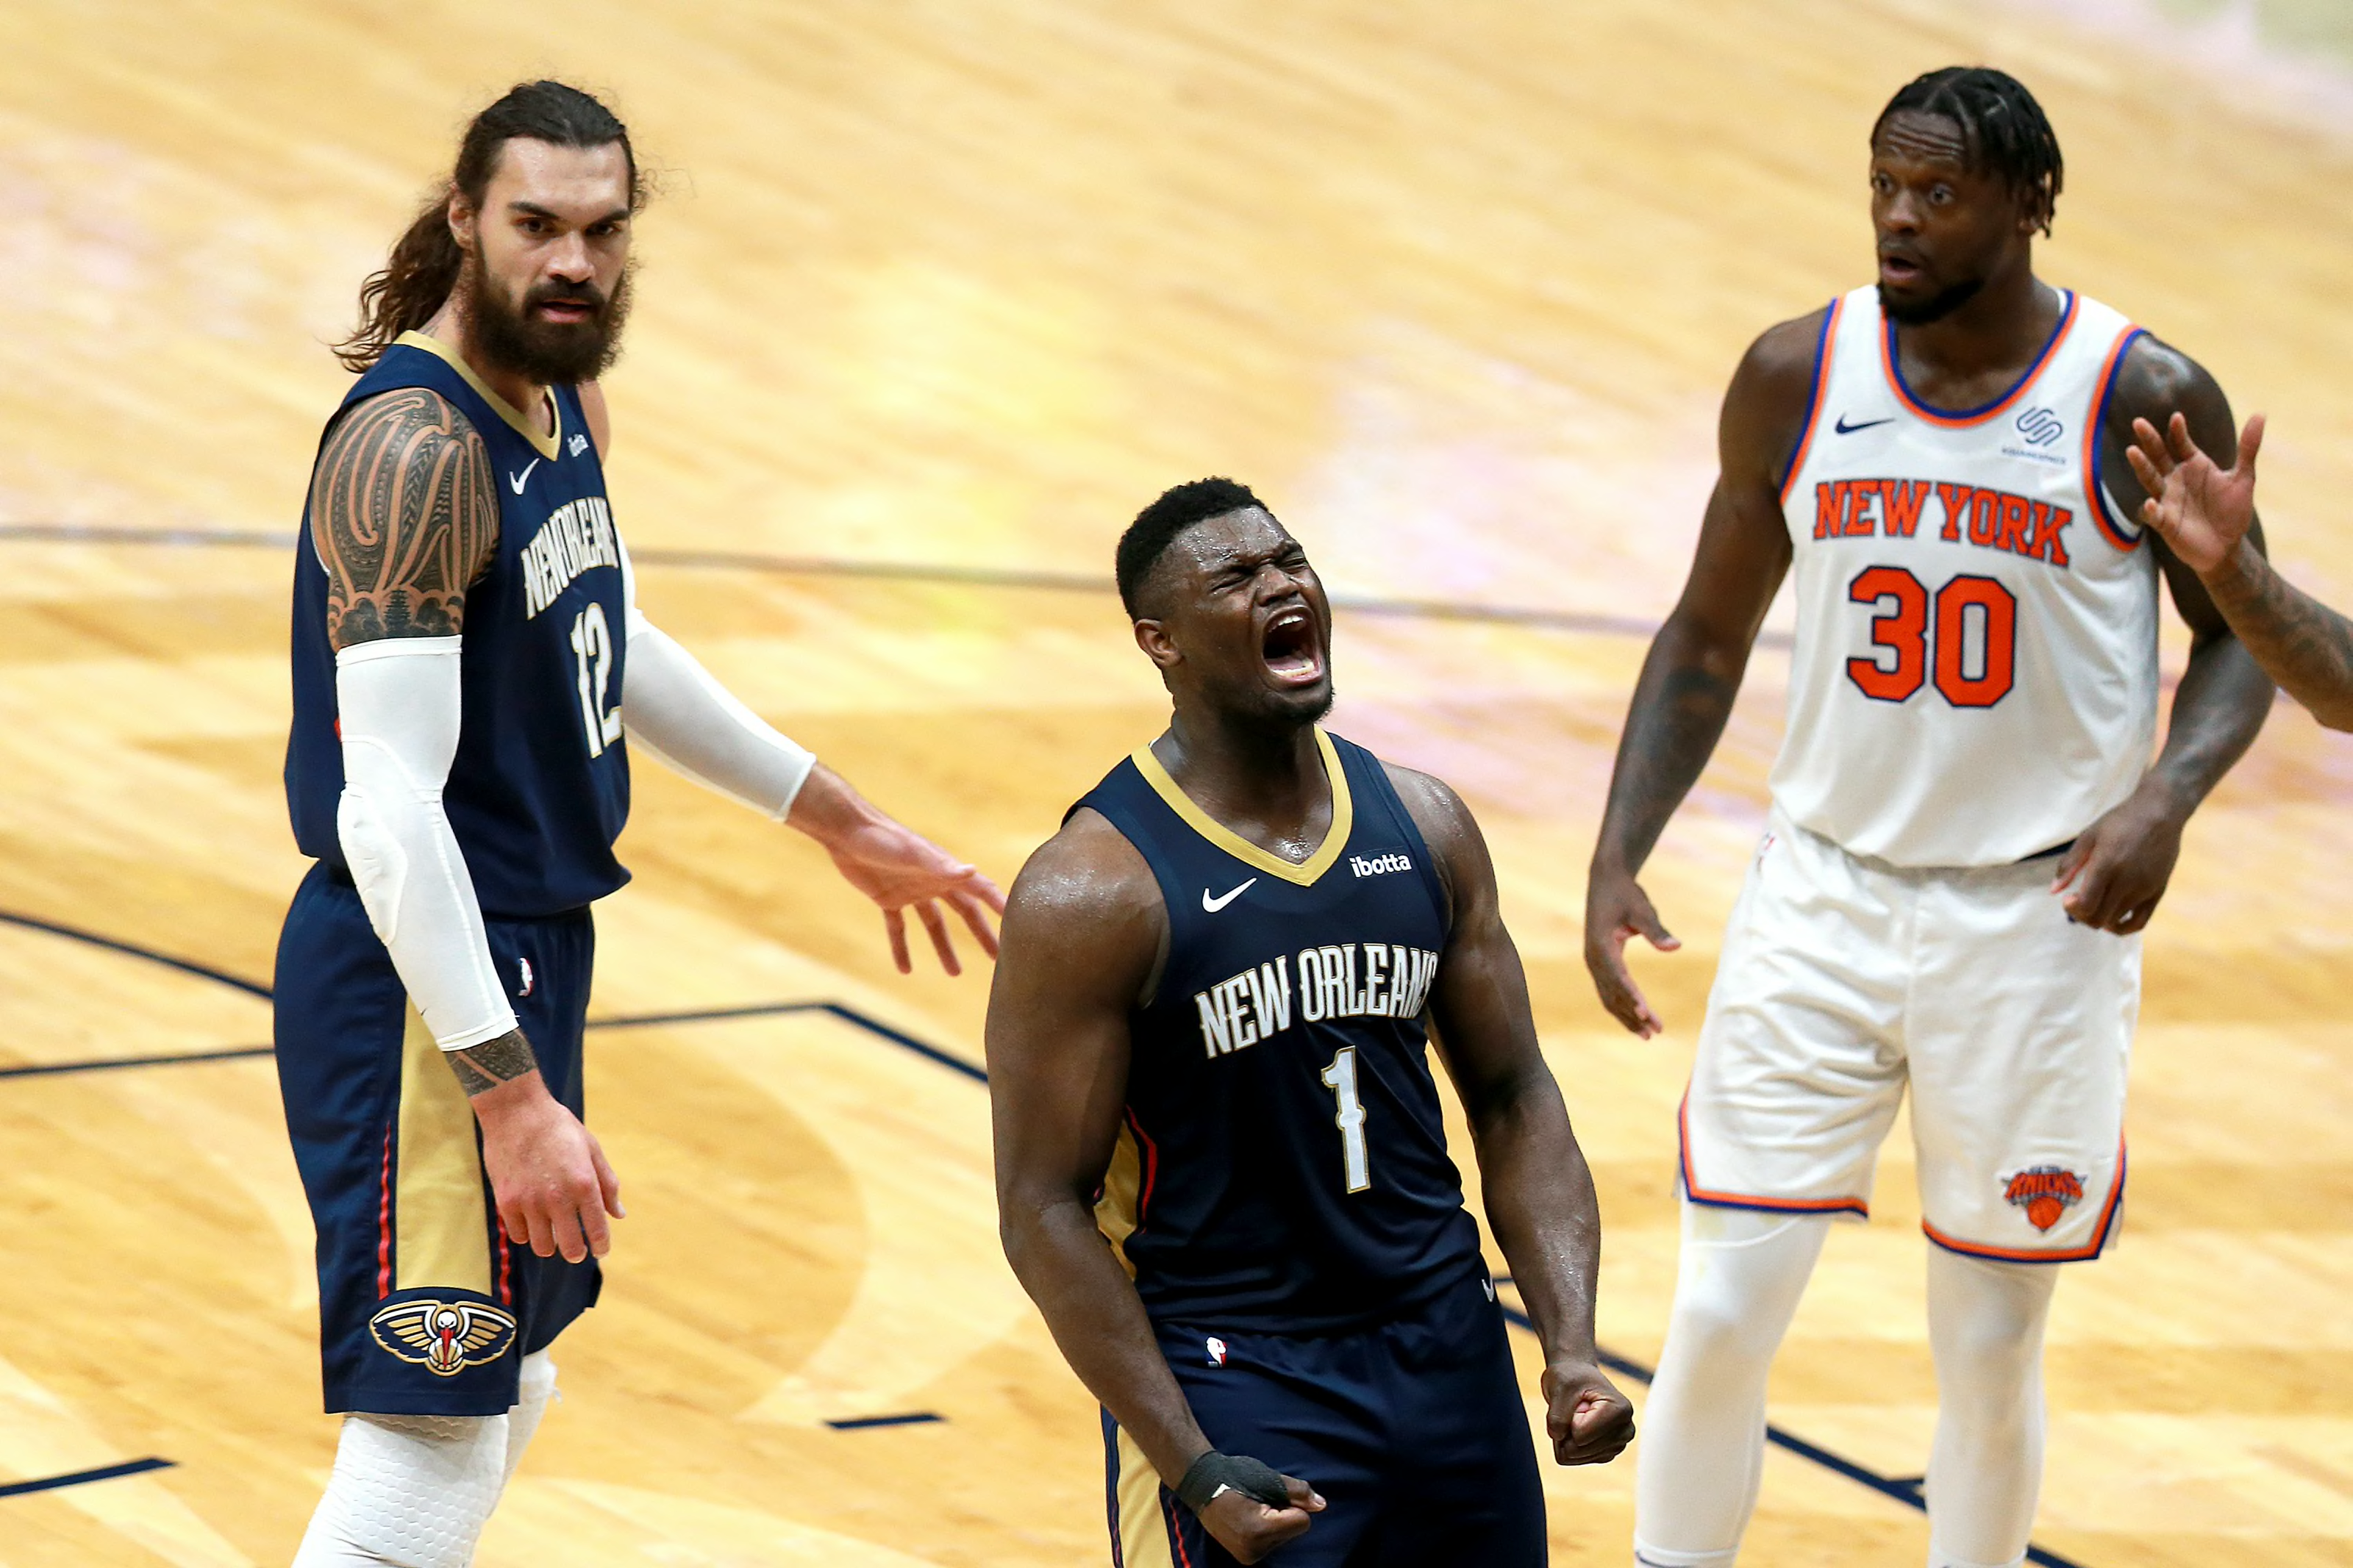 New Orleans Pelicans: 3 stories to follow vs. the Knicks